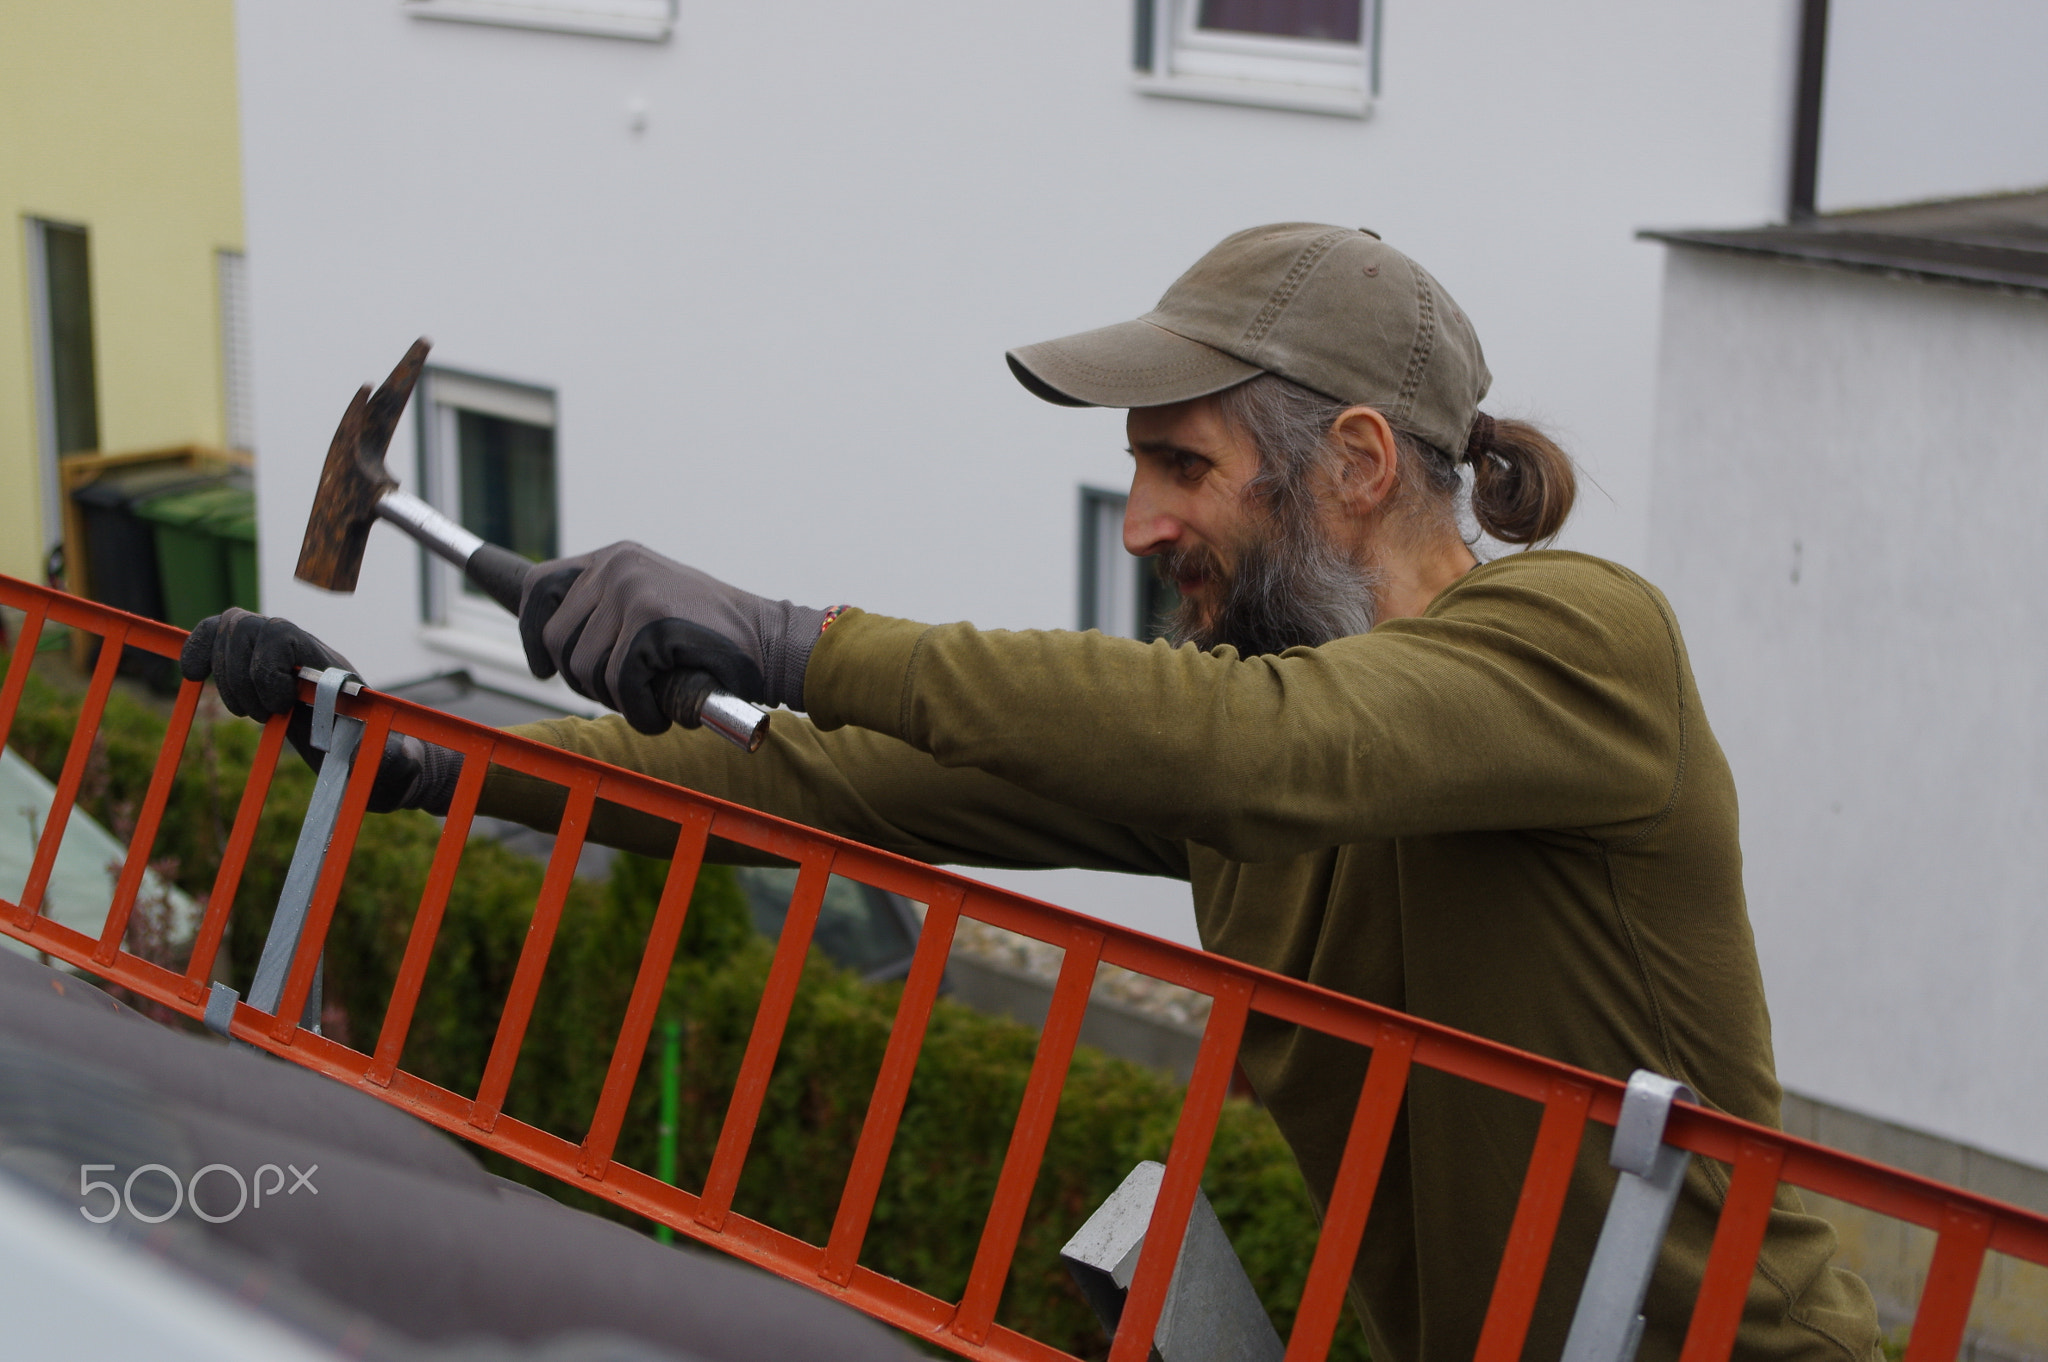 Roofer or a worker repaired on the roof  snow guard grating